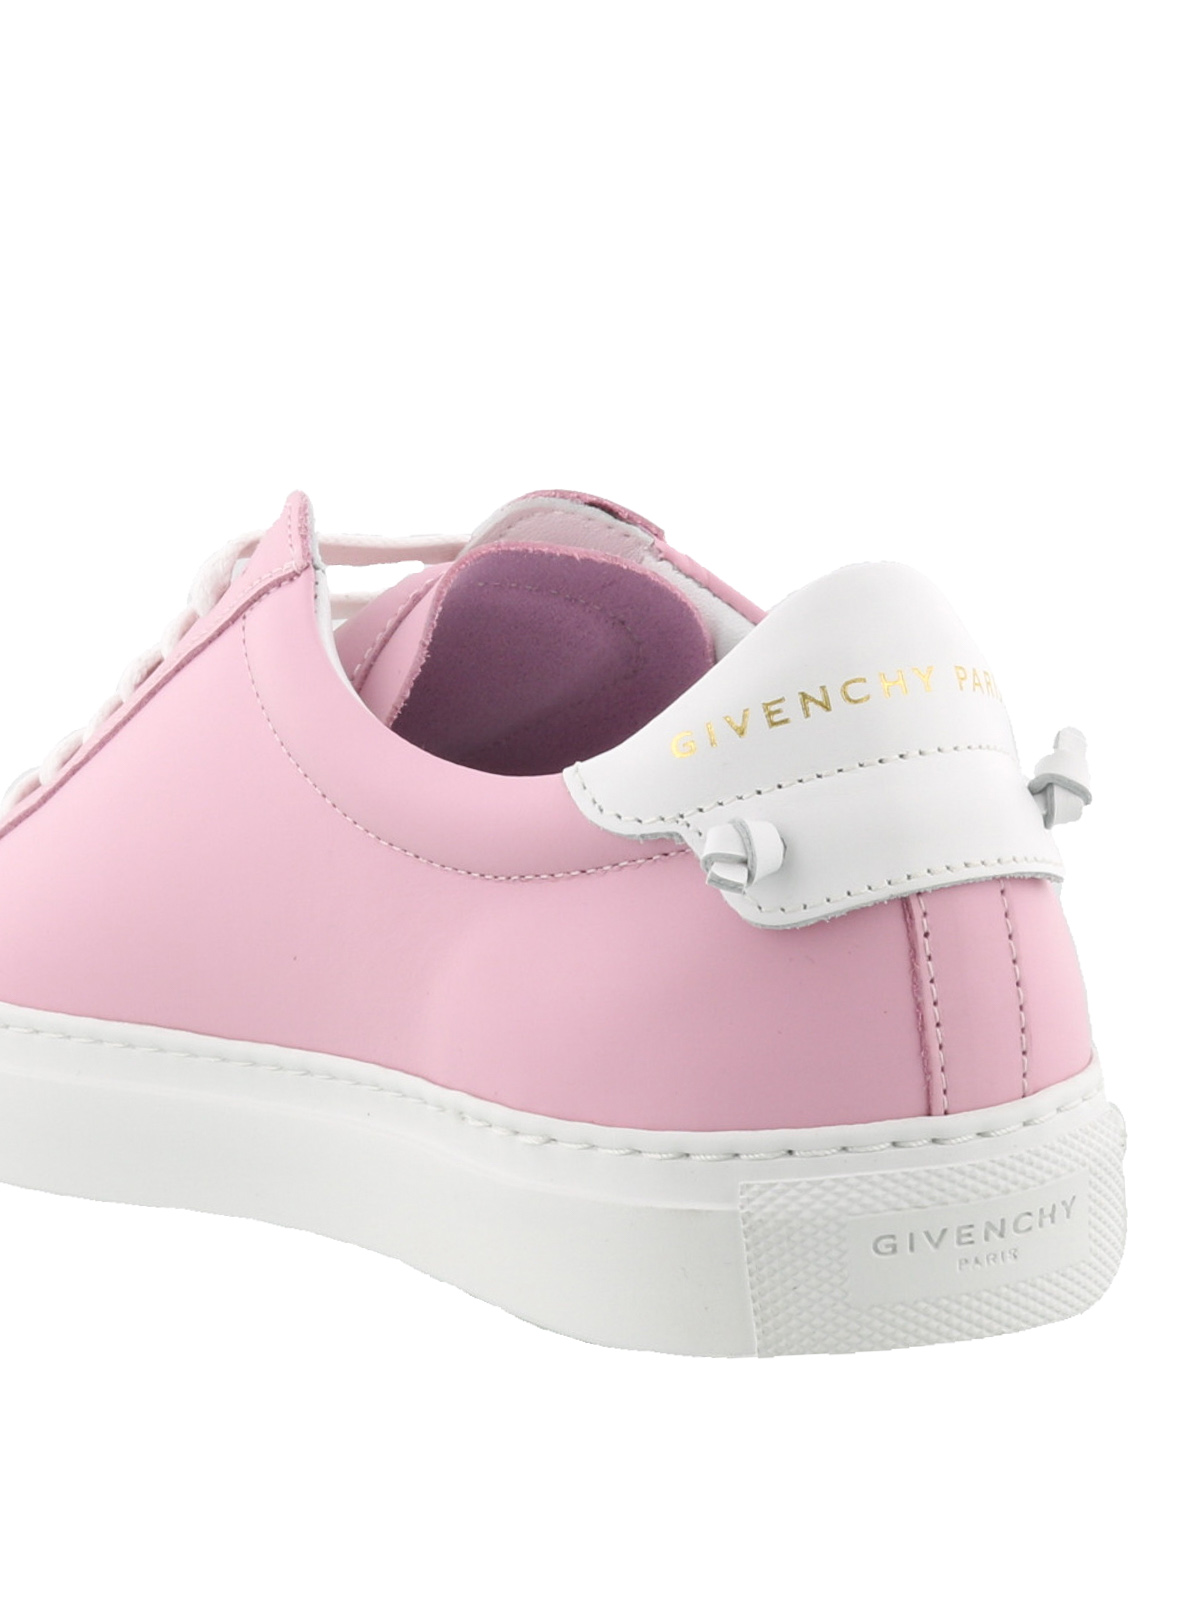 Givenchy - Knots pink leather sneakers 